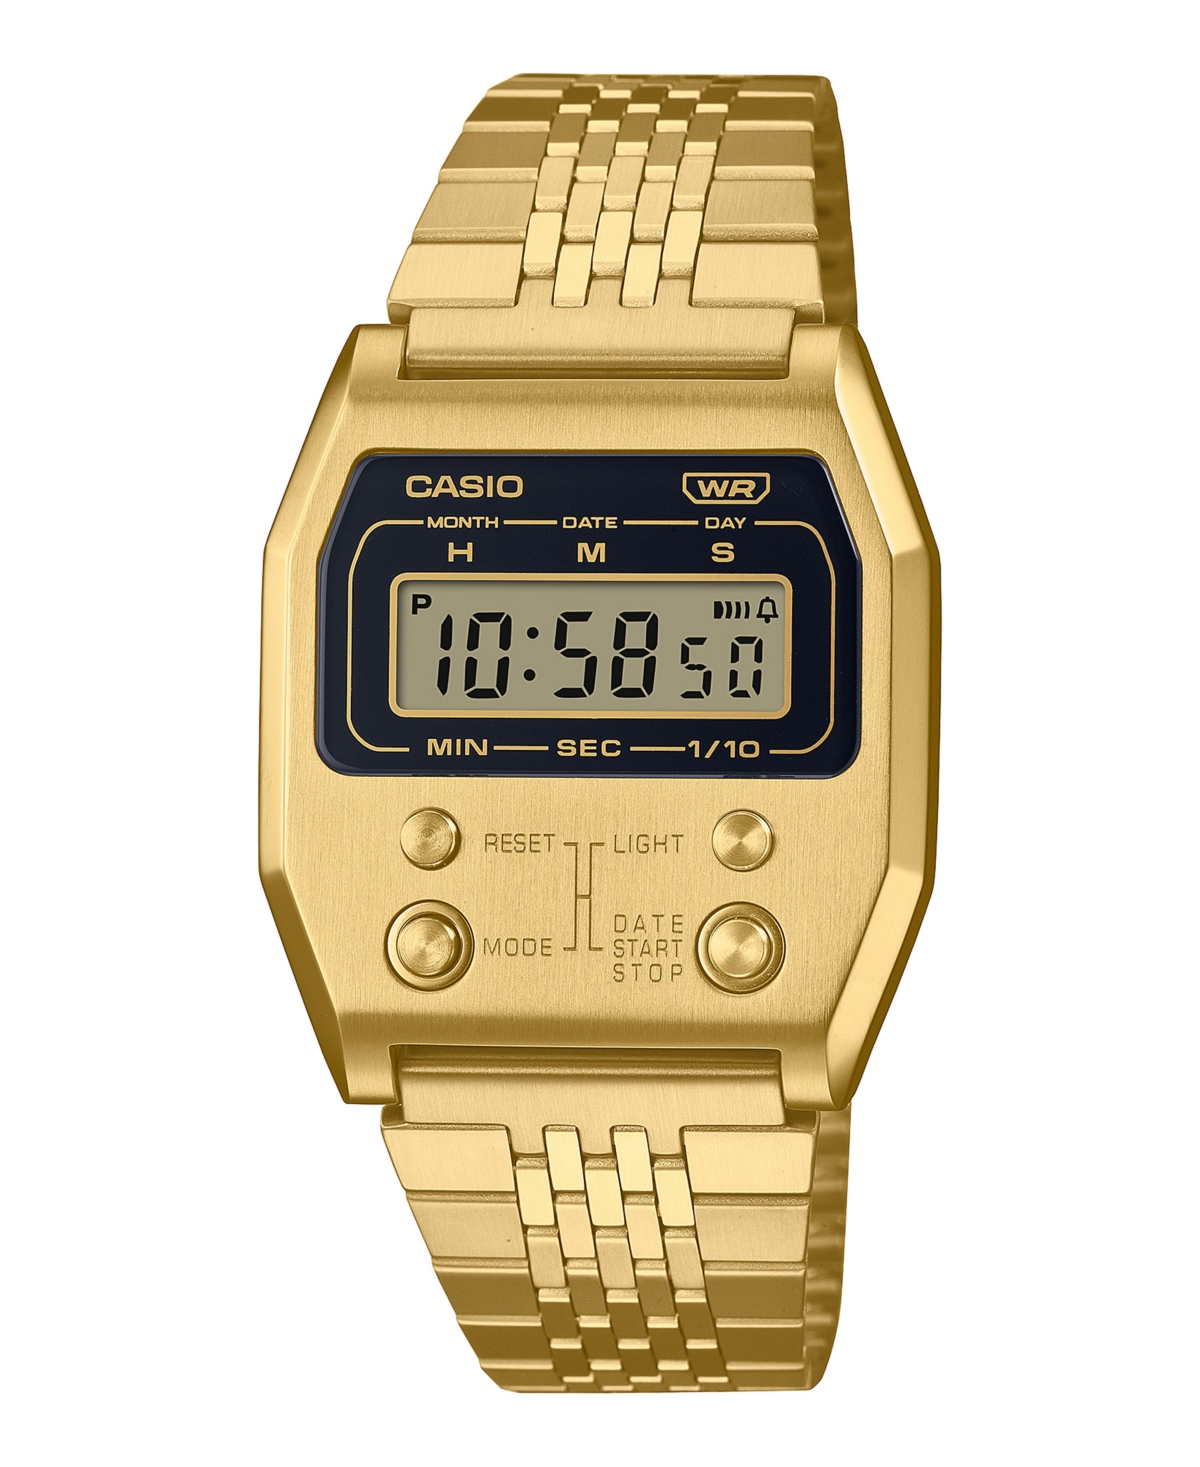 Unisex Digital Gold-Tone Stainless Steel Watch, 35mm, A1100G-5VT - Gold